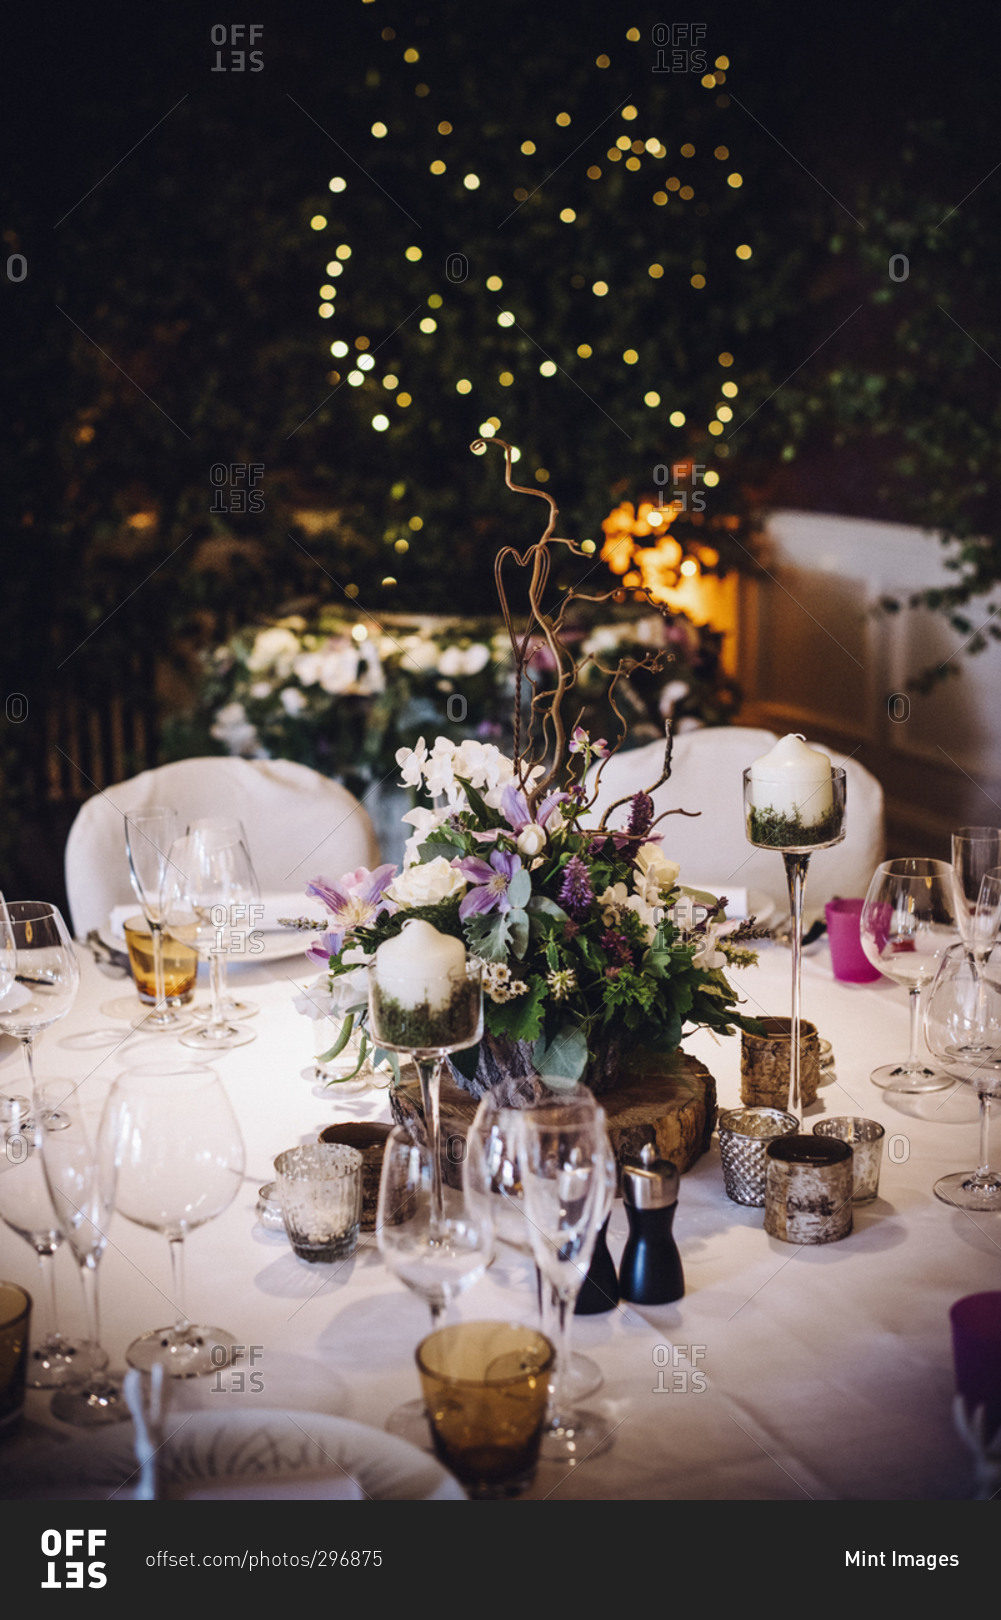 A table laid for a special occasion, with a floral centerpiece and candles, at night